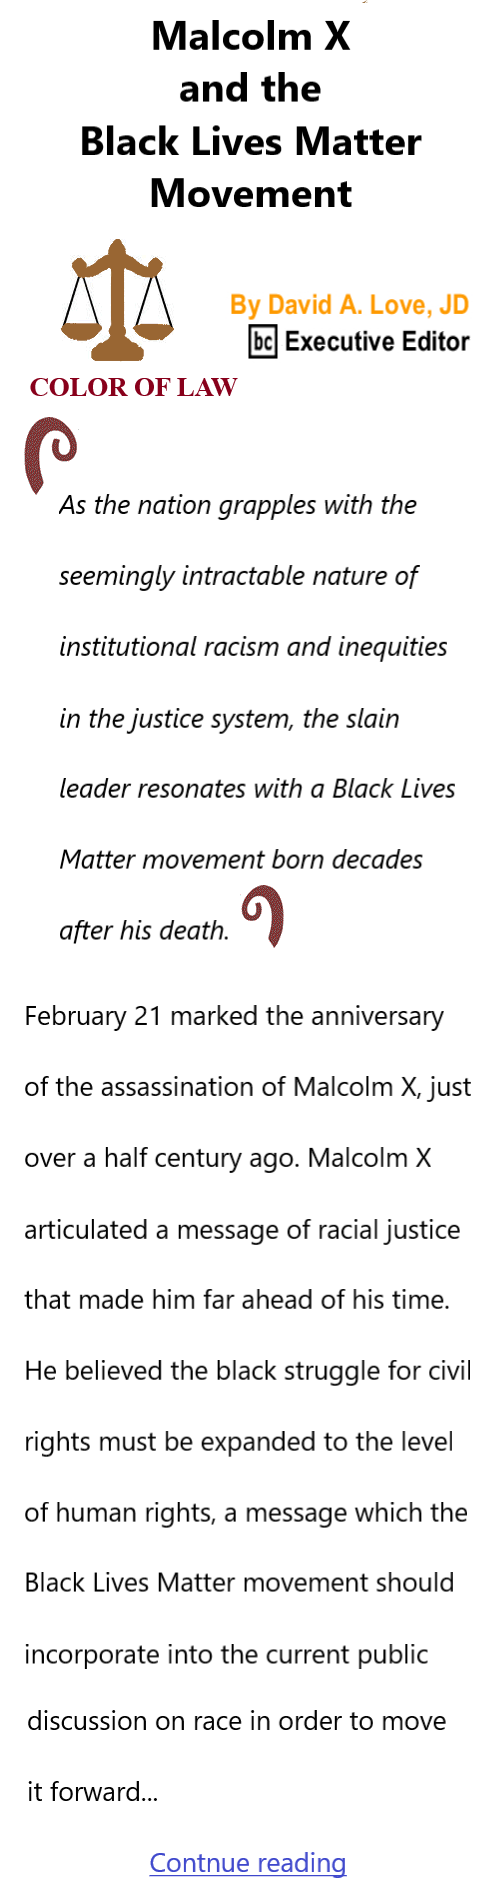 BlackCommentator.com Feb 24, 2023 - Issue 944: Malcolm X and the Black Lives Matter Movement - Color of Law By David A. Love, JD, BC Executive Editor